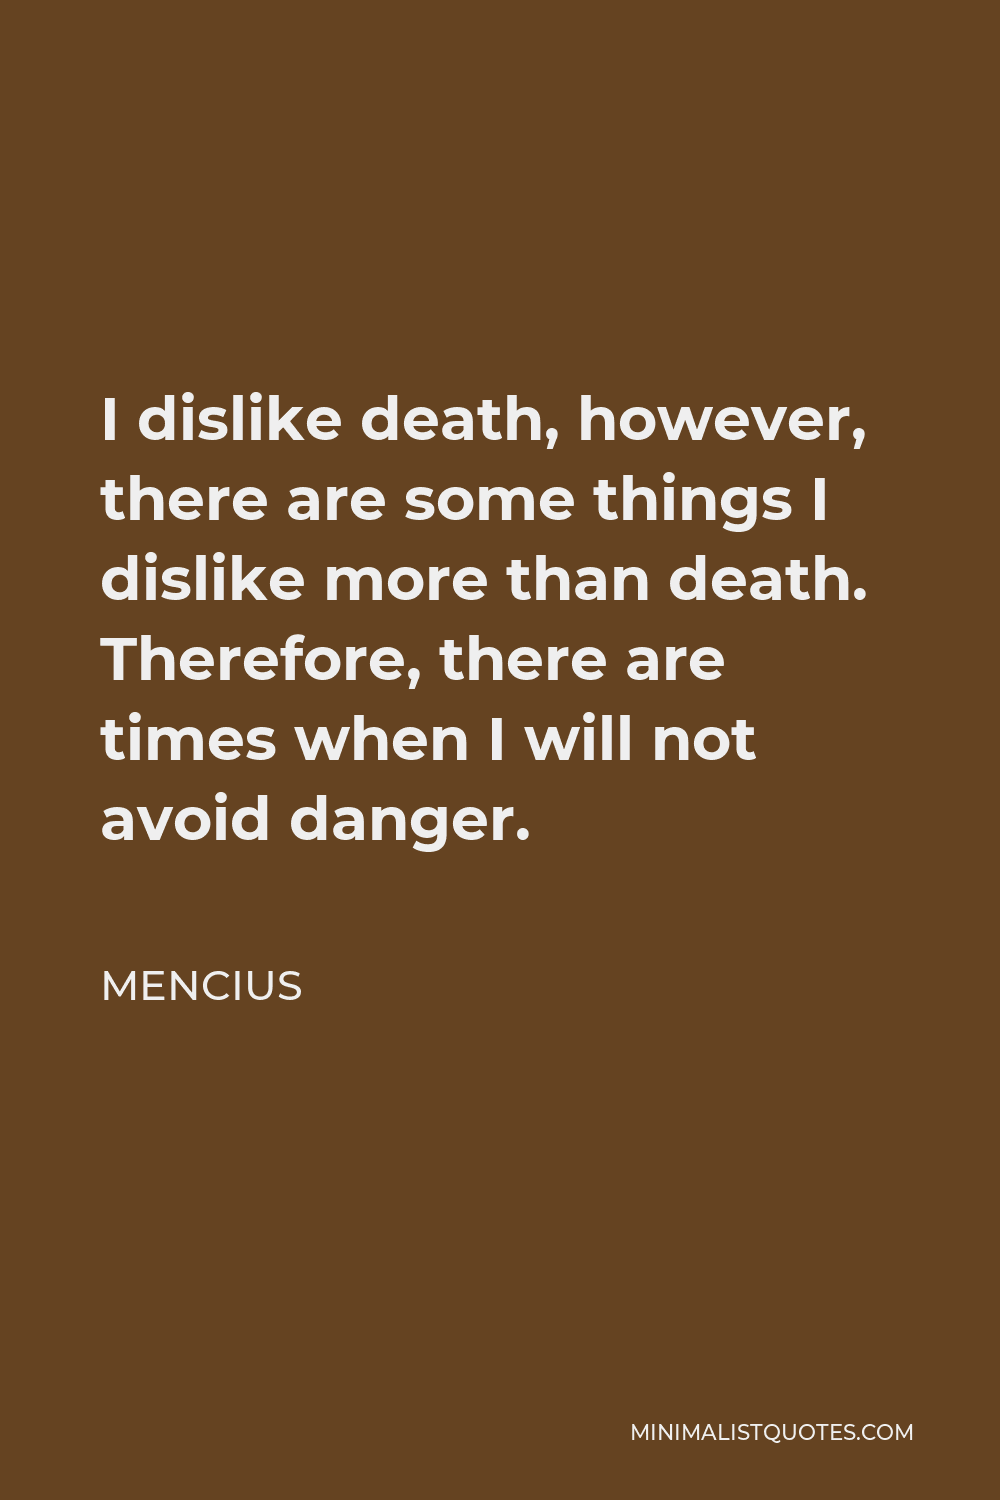 Mencius Quote - I dislike death, however, there are some things I dislike more than death. Therefore, there are times when I will not avoid danger.